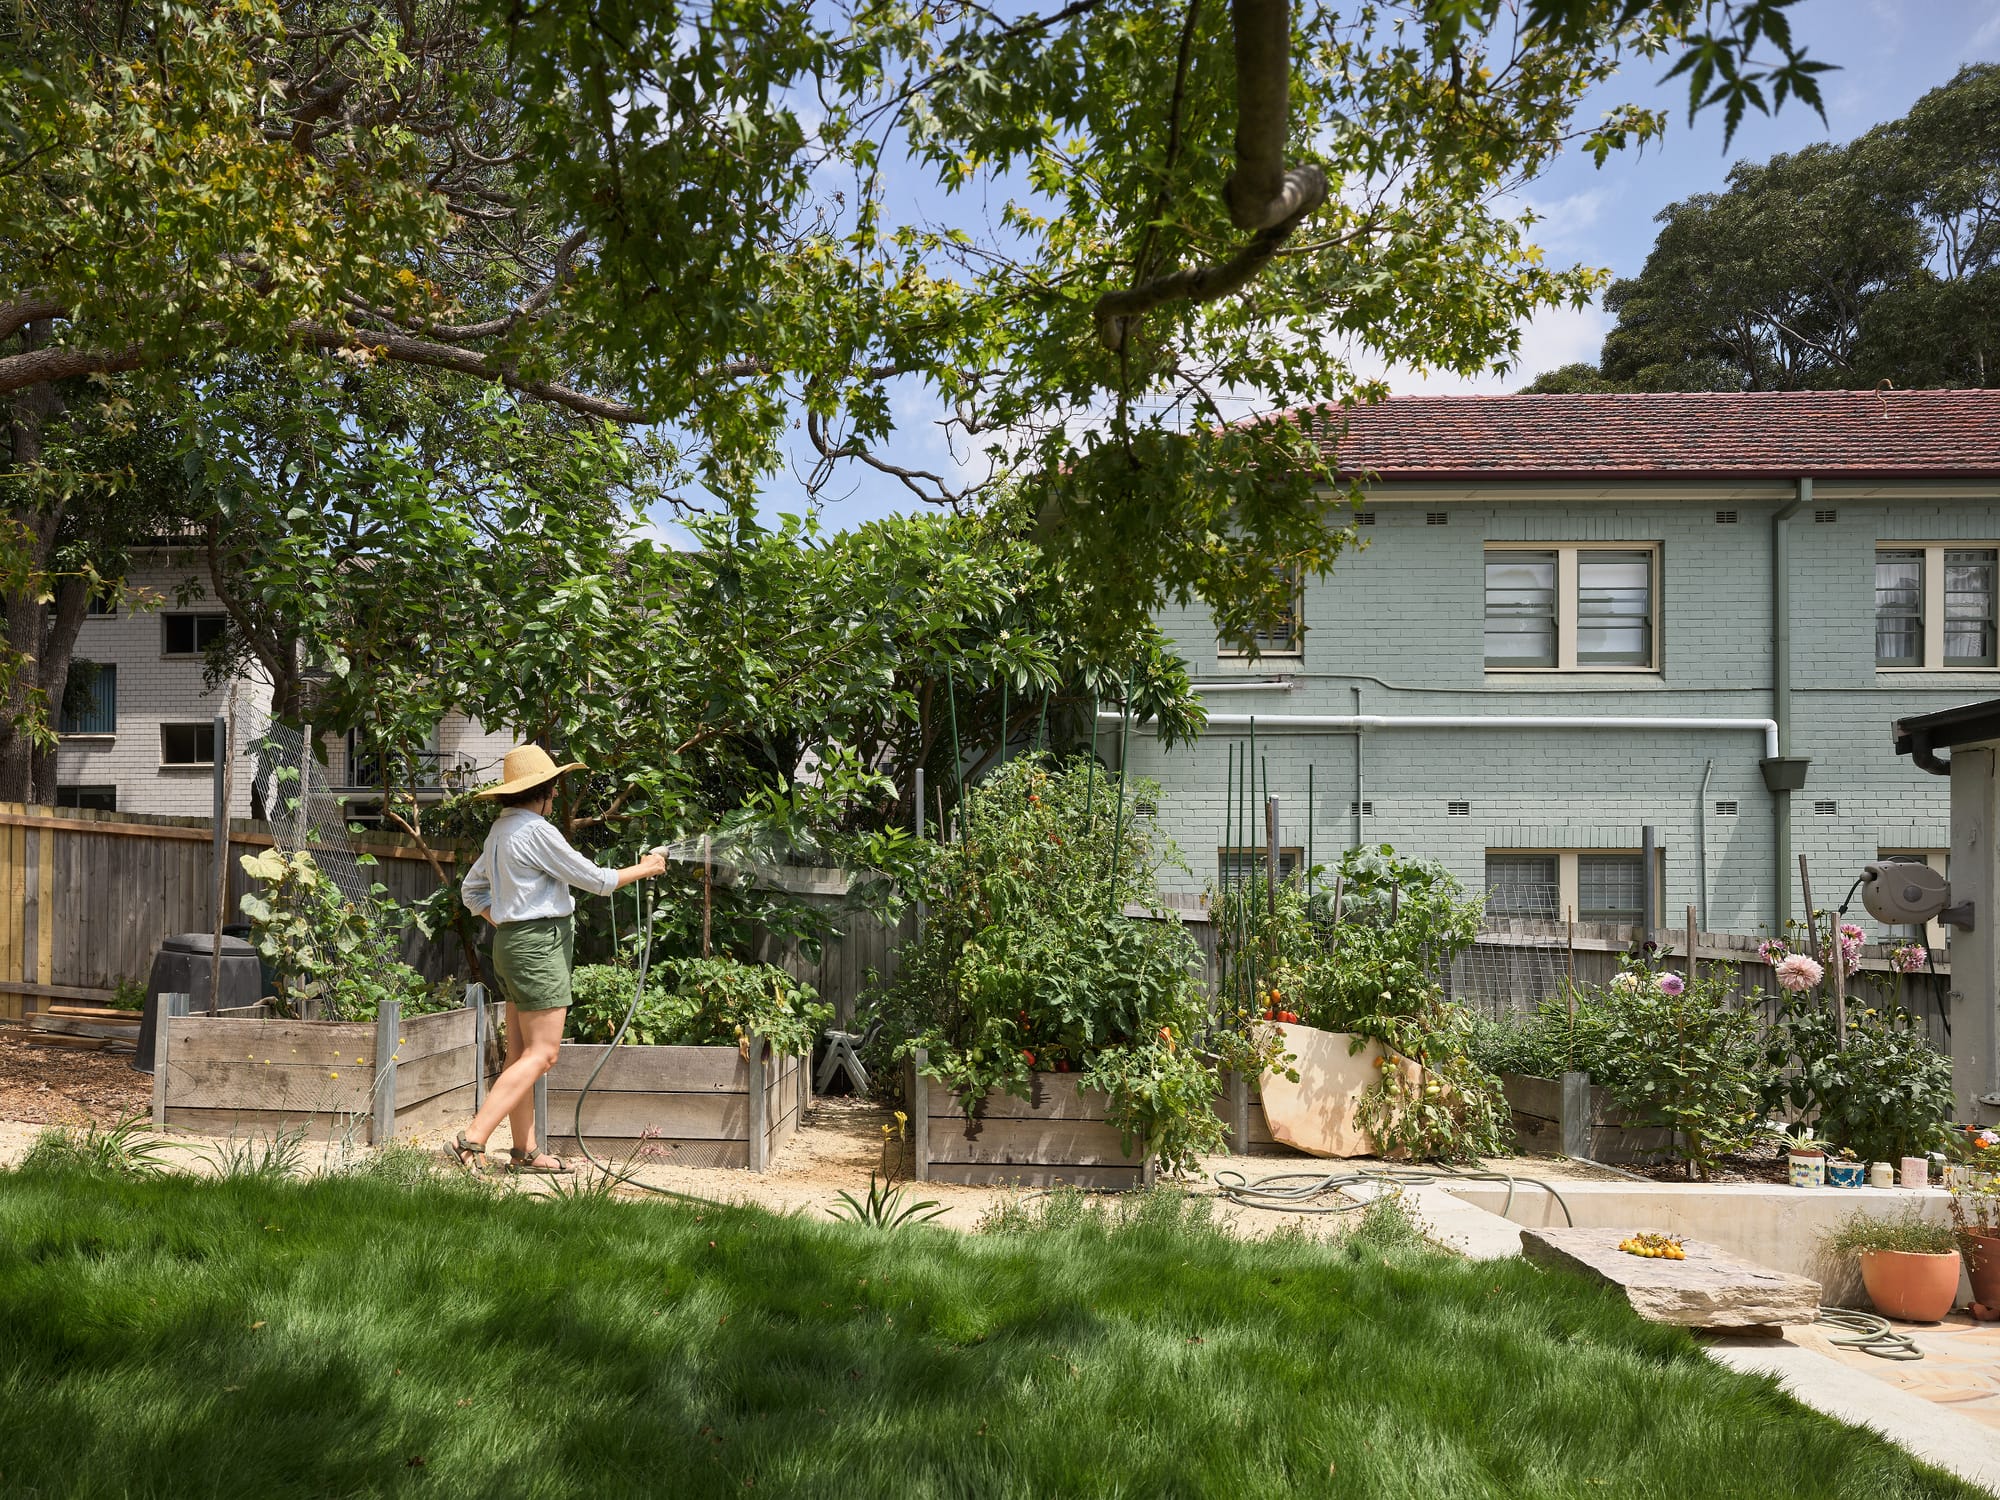 Coconut Crab by Alexander Symes Architect. Photography by Barton Taylor Photography. Vegetable patch being watered by woman in a hat. Long green grass in foreground, double storey teal building in background.